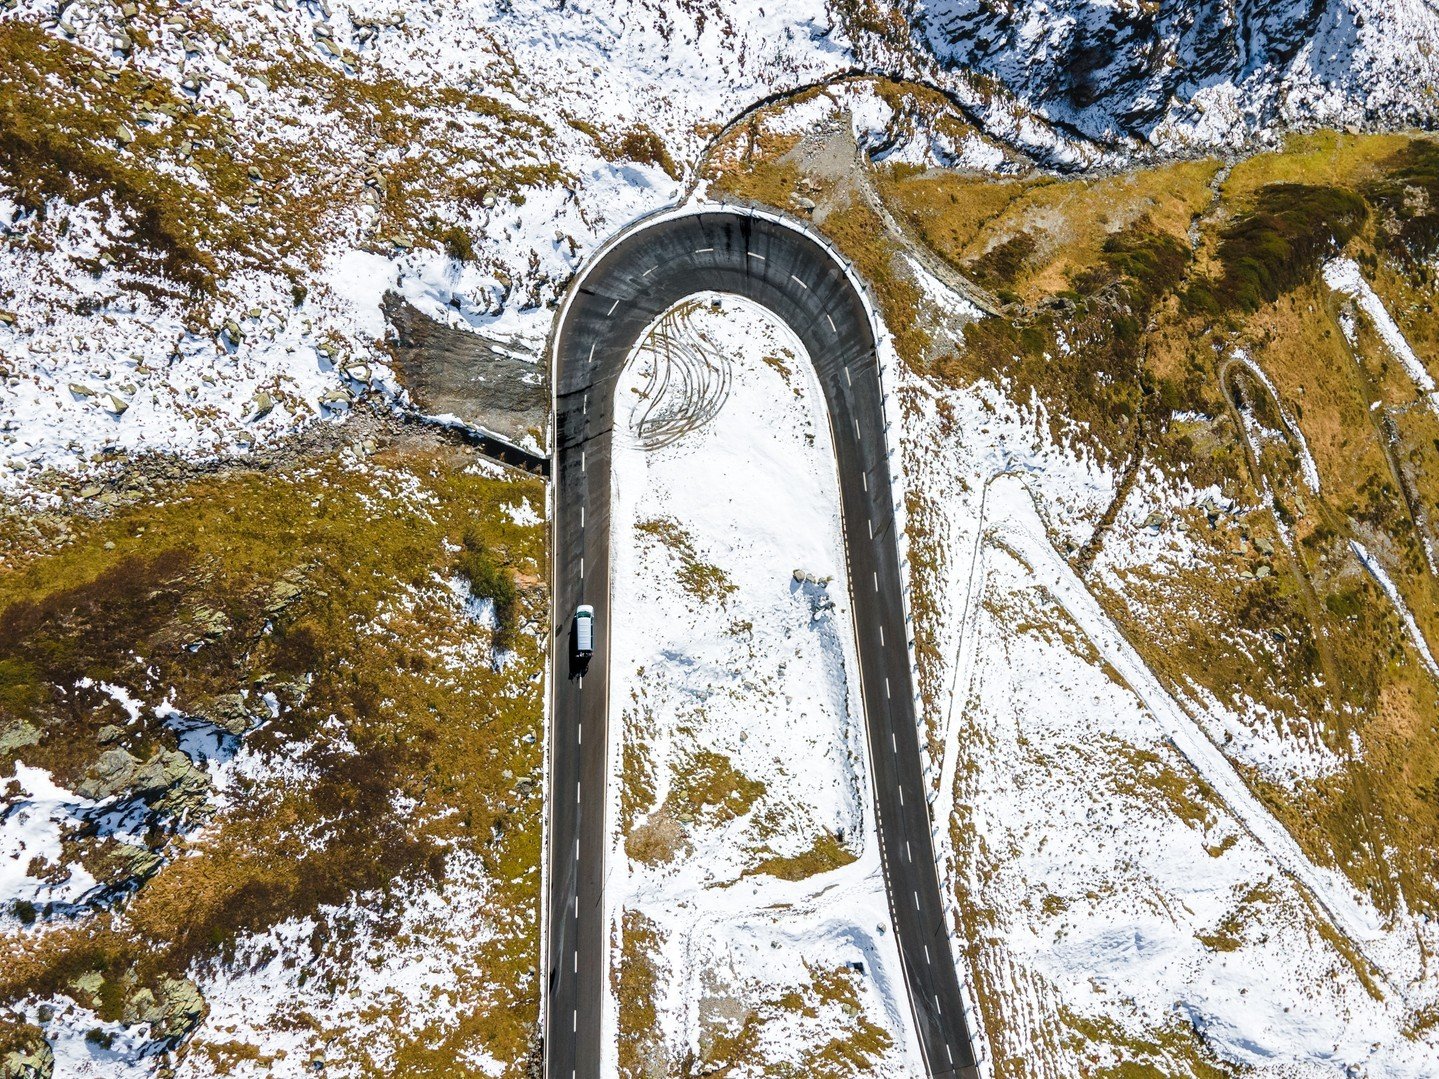 #switchbacksaturday on the Susten Pass 🇨🇭⁠
⁠
&quot;It&rsquo;s as much a piece of motor transport history as the Appian Way or Route 66. That&rsquo;s why the Swiss Government deem it a &lsquo;Road of National Historic Importance&rsquo;.&quot;⁠
⁠
Fin